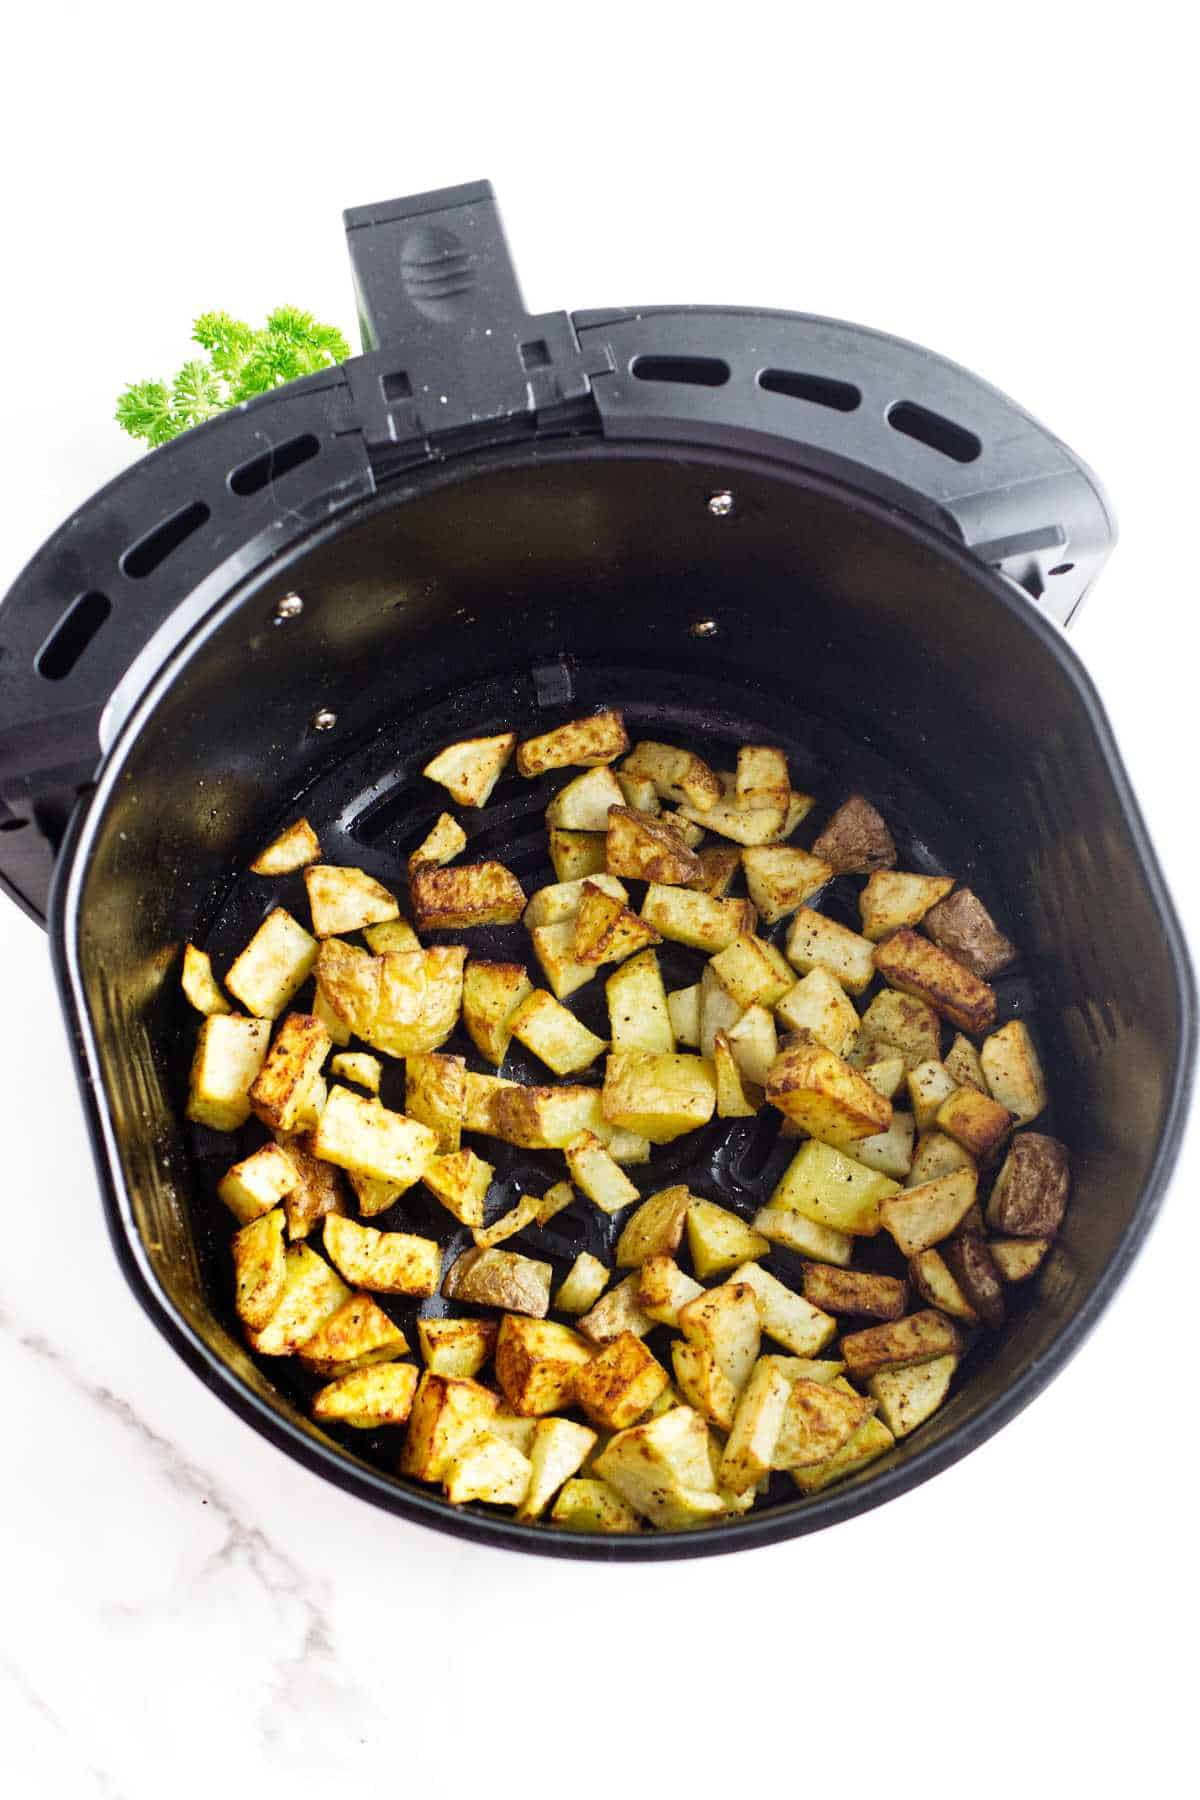 cubes of cooked potato in the basket of an air fryer.